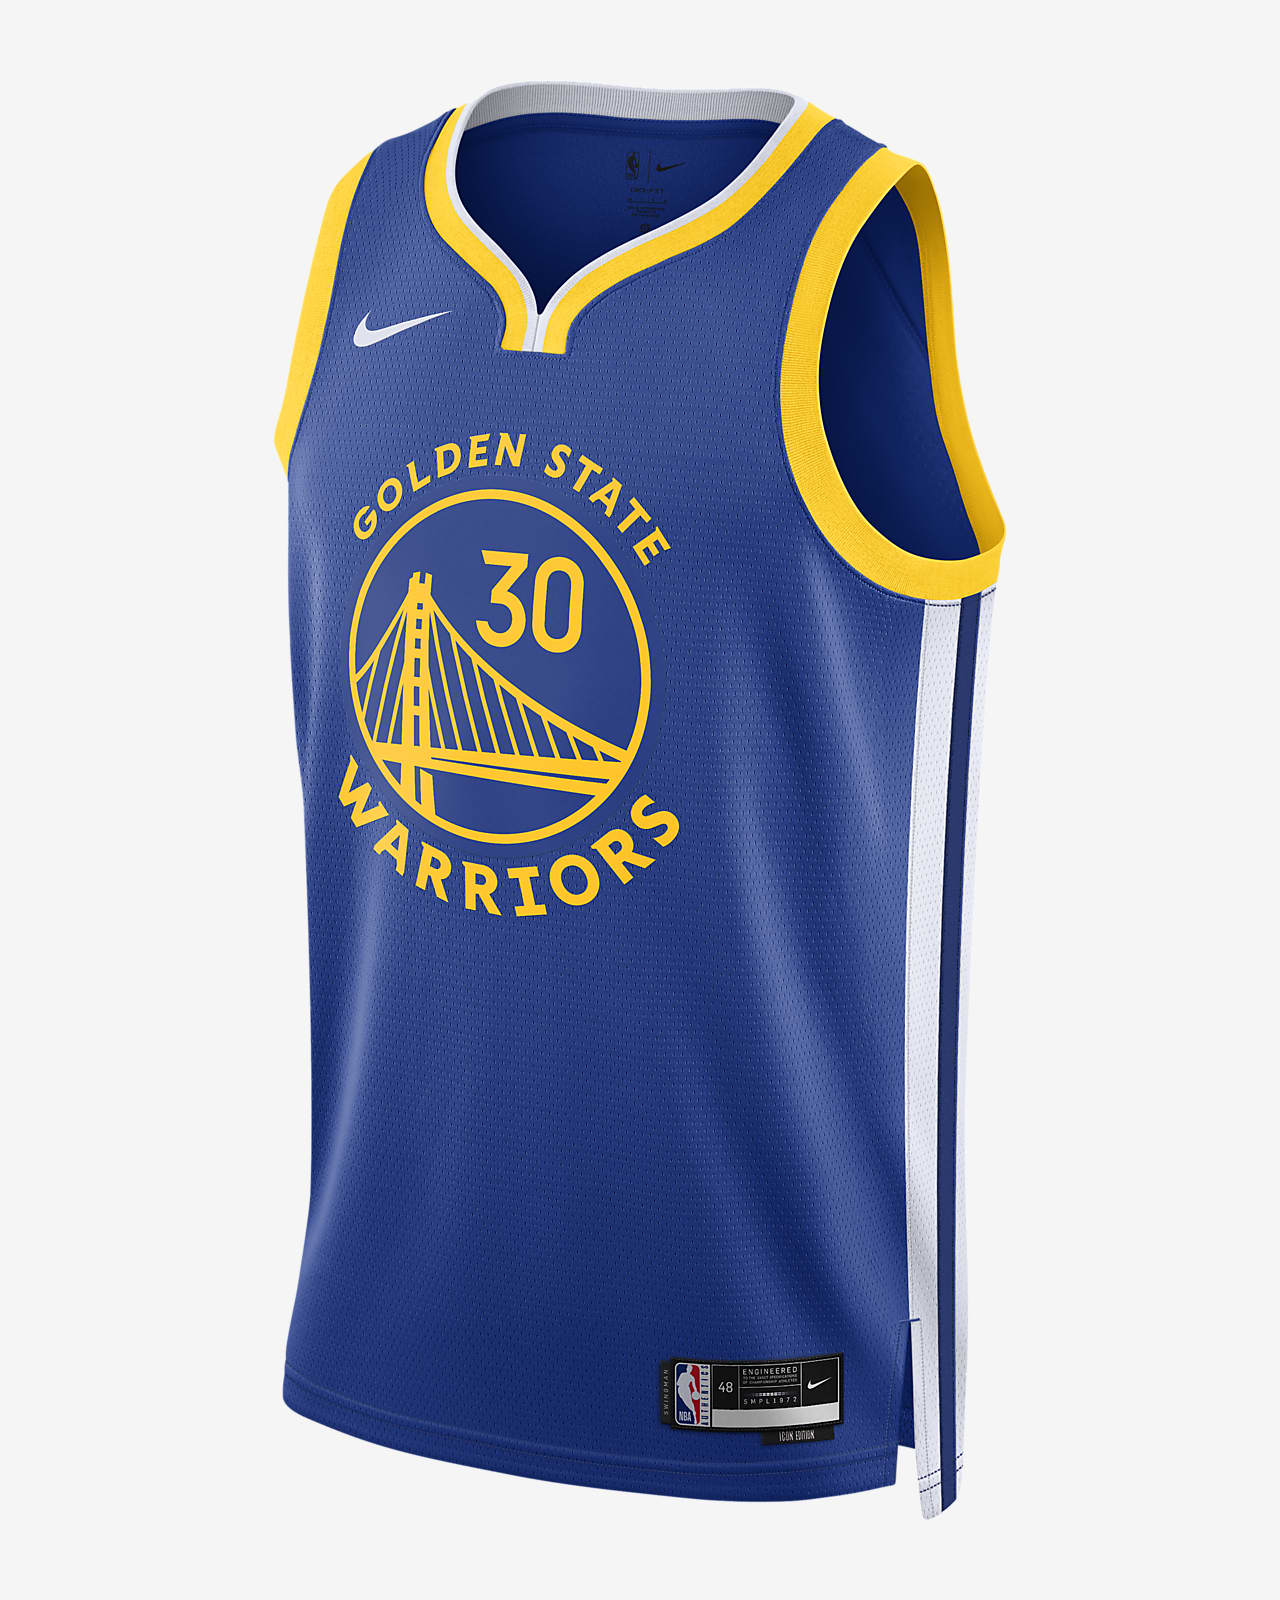 https://static.nike.com/a/images/t_PDP_1280_v1/f_auto,q_auto:eco/7ac6733f-1dc1-46ce-ae77-fbd4c73099f9/golden-state-warriors-icon-edition-2022-23-dri-fit-nba-swingman-jersey-fsVpF9.png